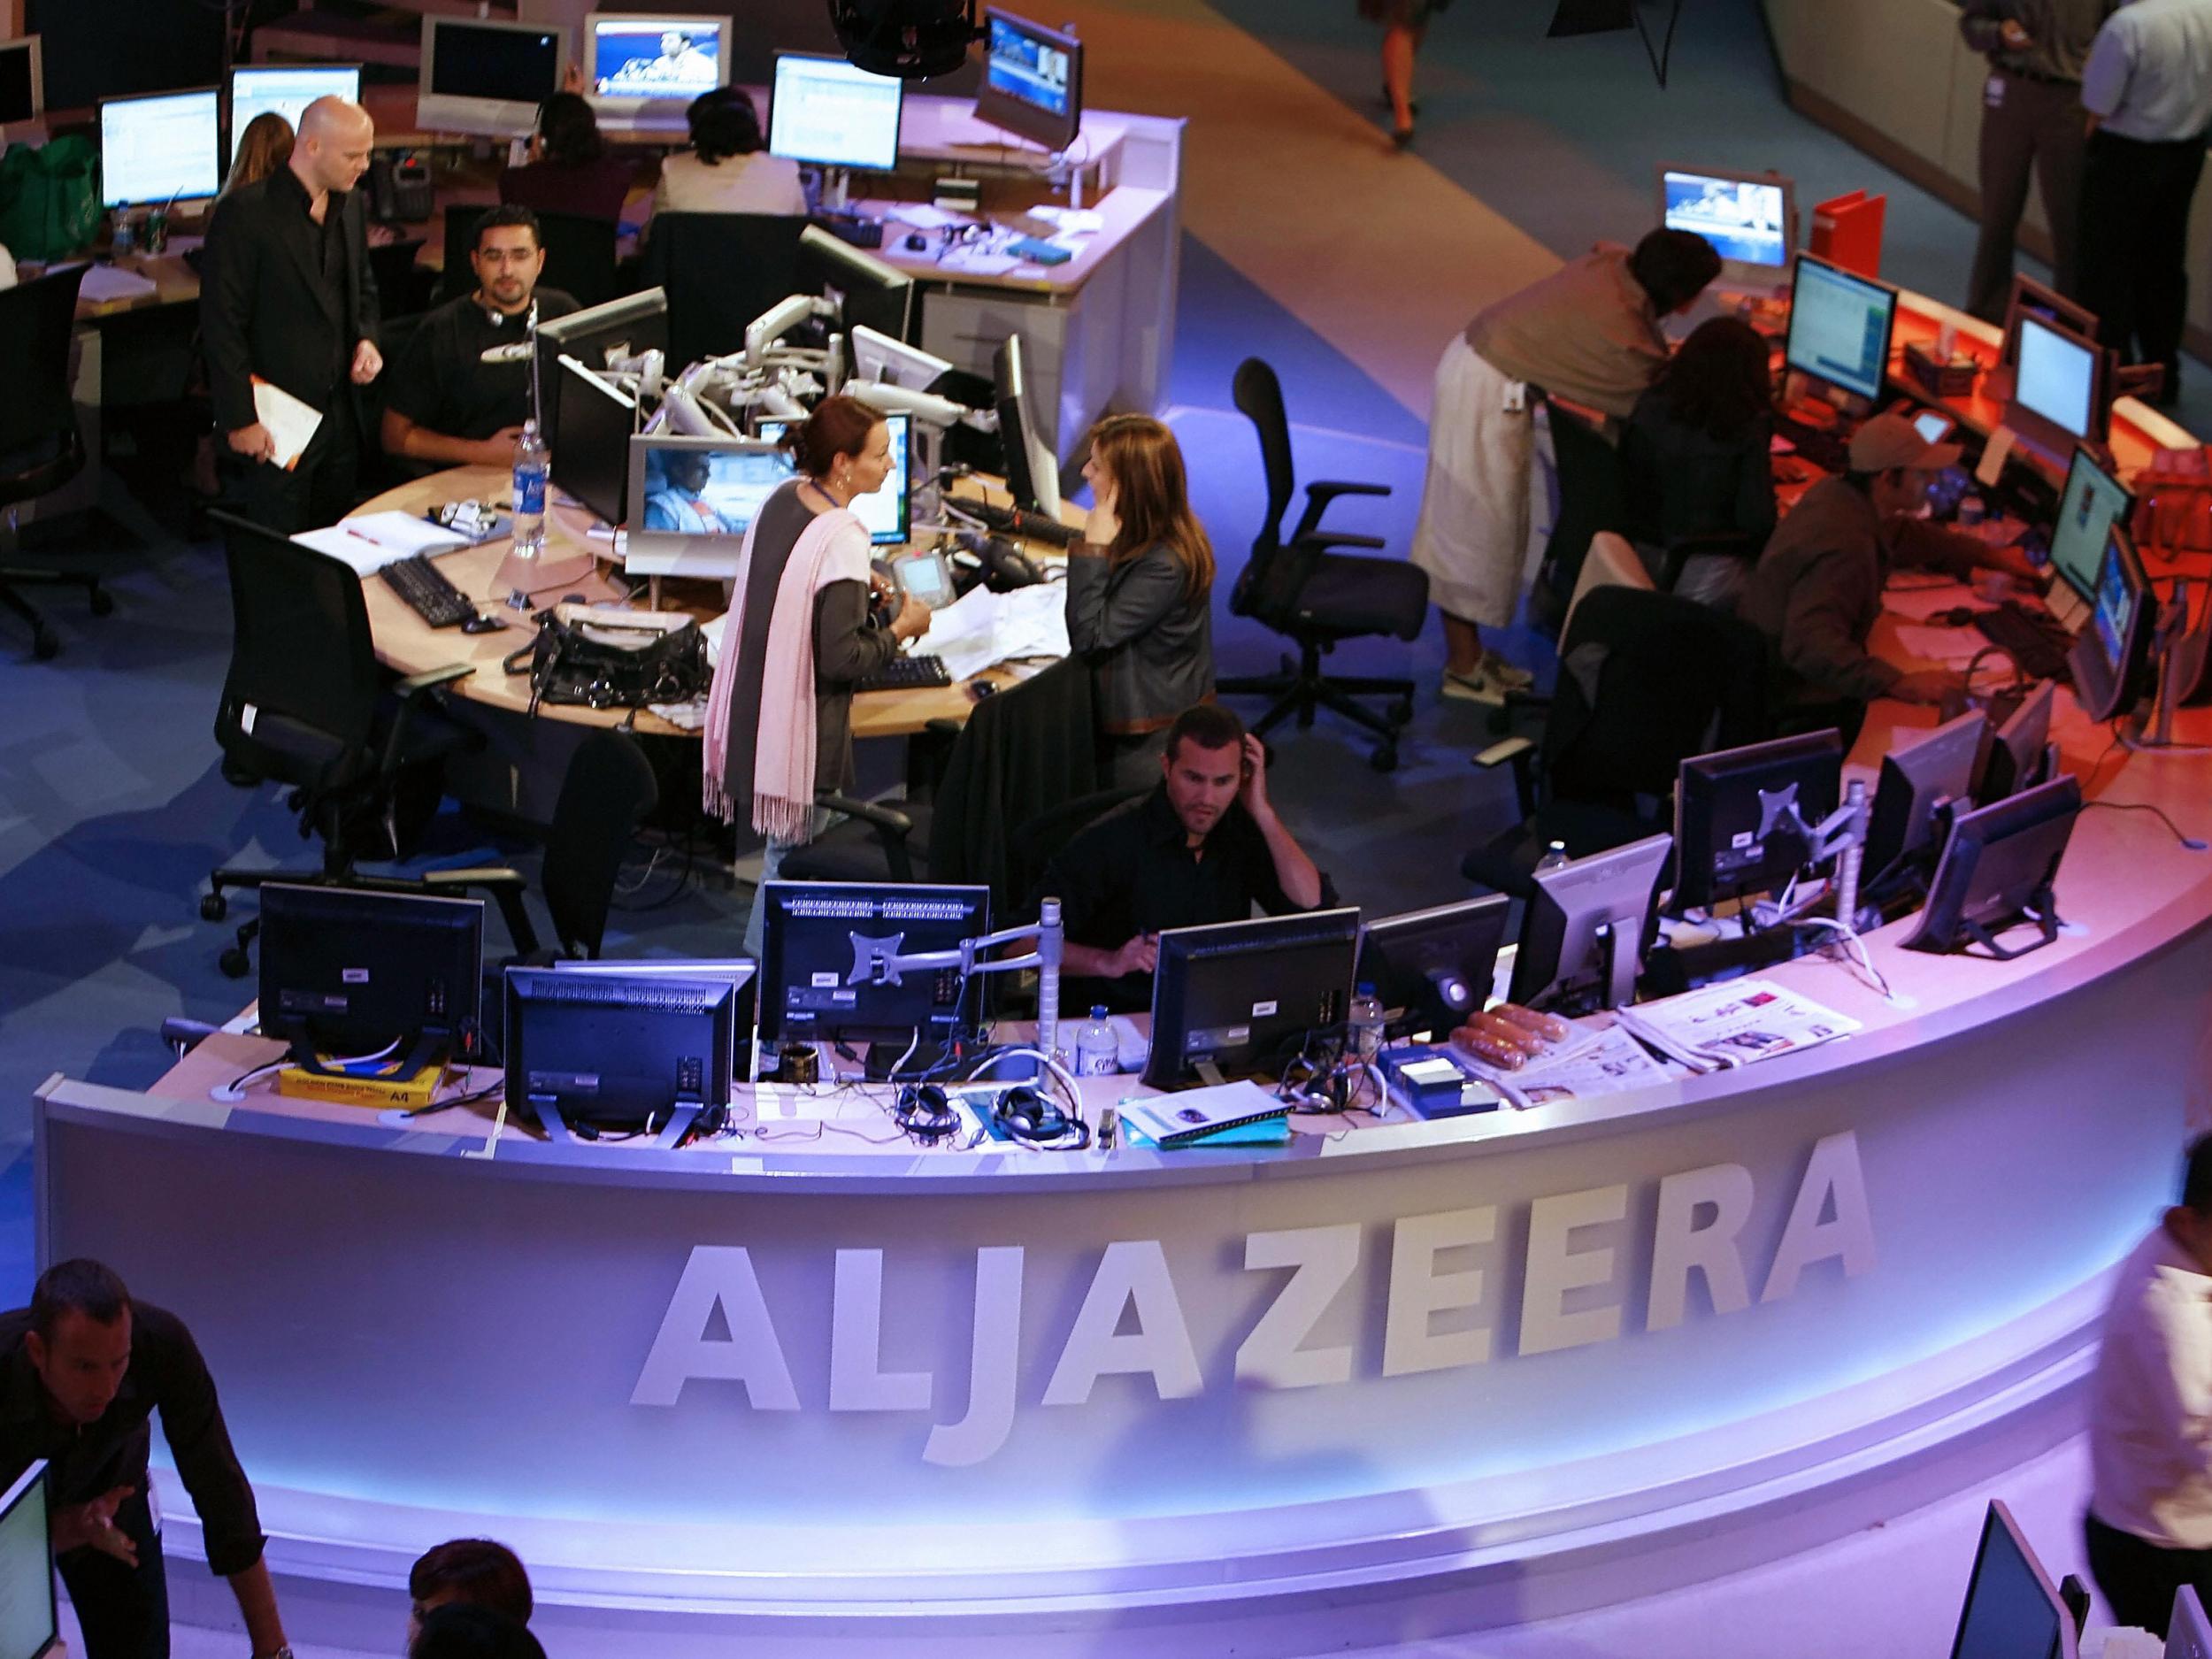 The team who work on ‘The Lobby’ with Al Jazeera are well-respected investigative journalists, but for some reason their latest venture hasn't appeared in the public eye